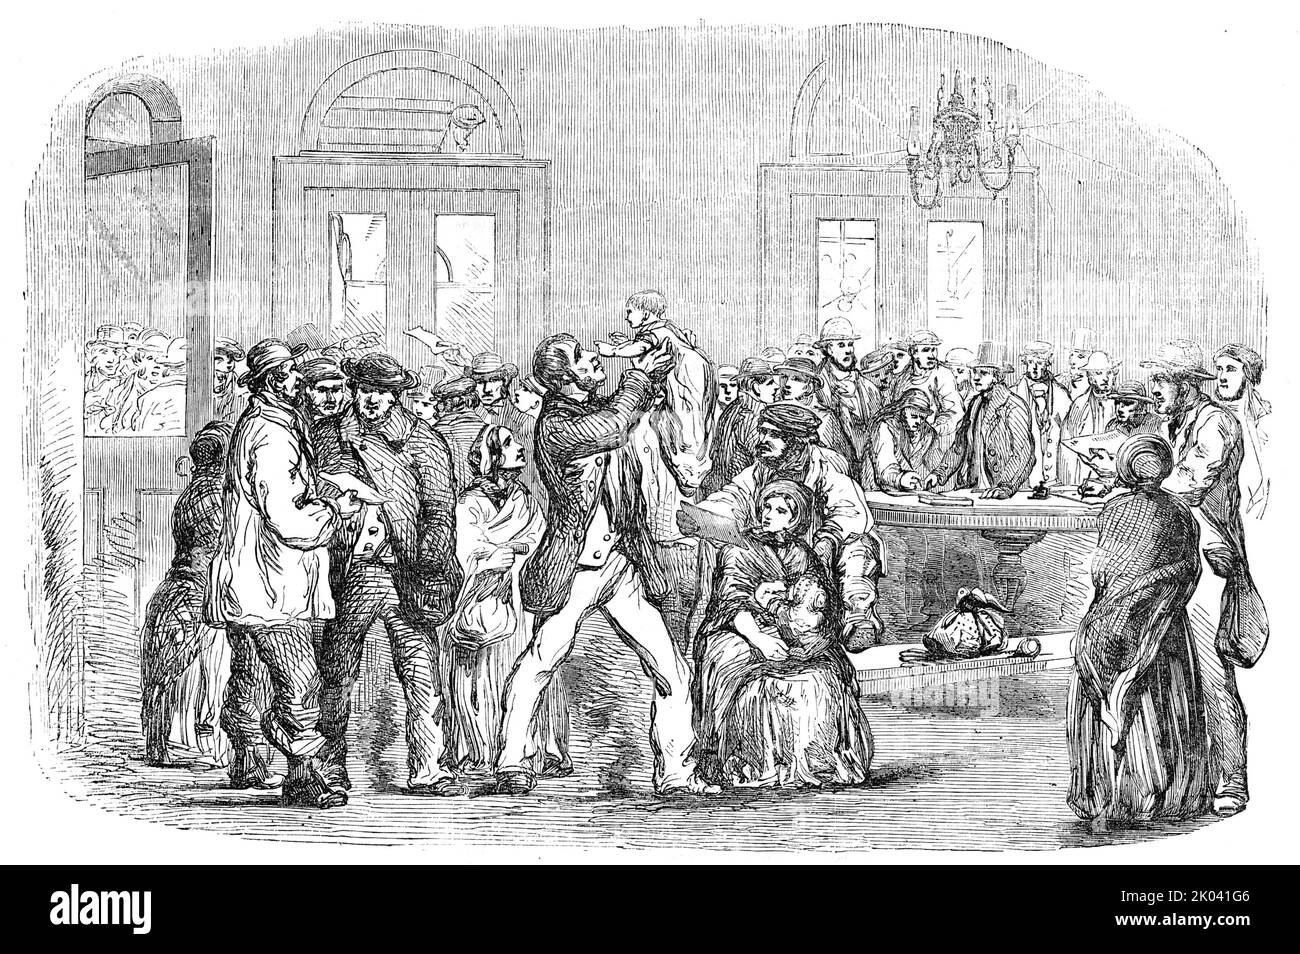 Navvies at the North-Western Railway Terminus, Euston-Square, 1854. Manual labourers leaving London for the seat of war in the Crimea. '...there are instances of men who have risen from the pick and wheelbarrow to be contractors, have banking accounts, and dine with Peers...as a general rule, a well-built frame and strong lungs, breadth across the chest, back, and loins, rather than excessive height, are the characteristics of the genuine Navvy...They have the faults of all uneducated men in this beer-drinking country, who work hard and earn heavy wages...But they have also many virtues. They Stock Photo